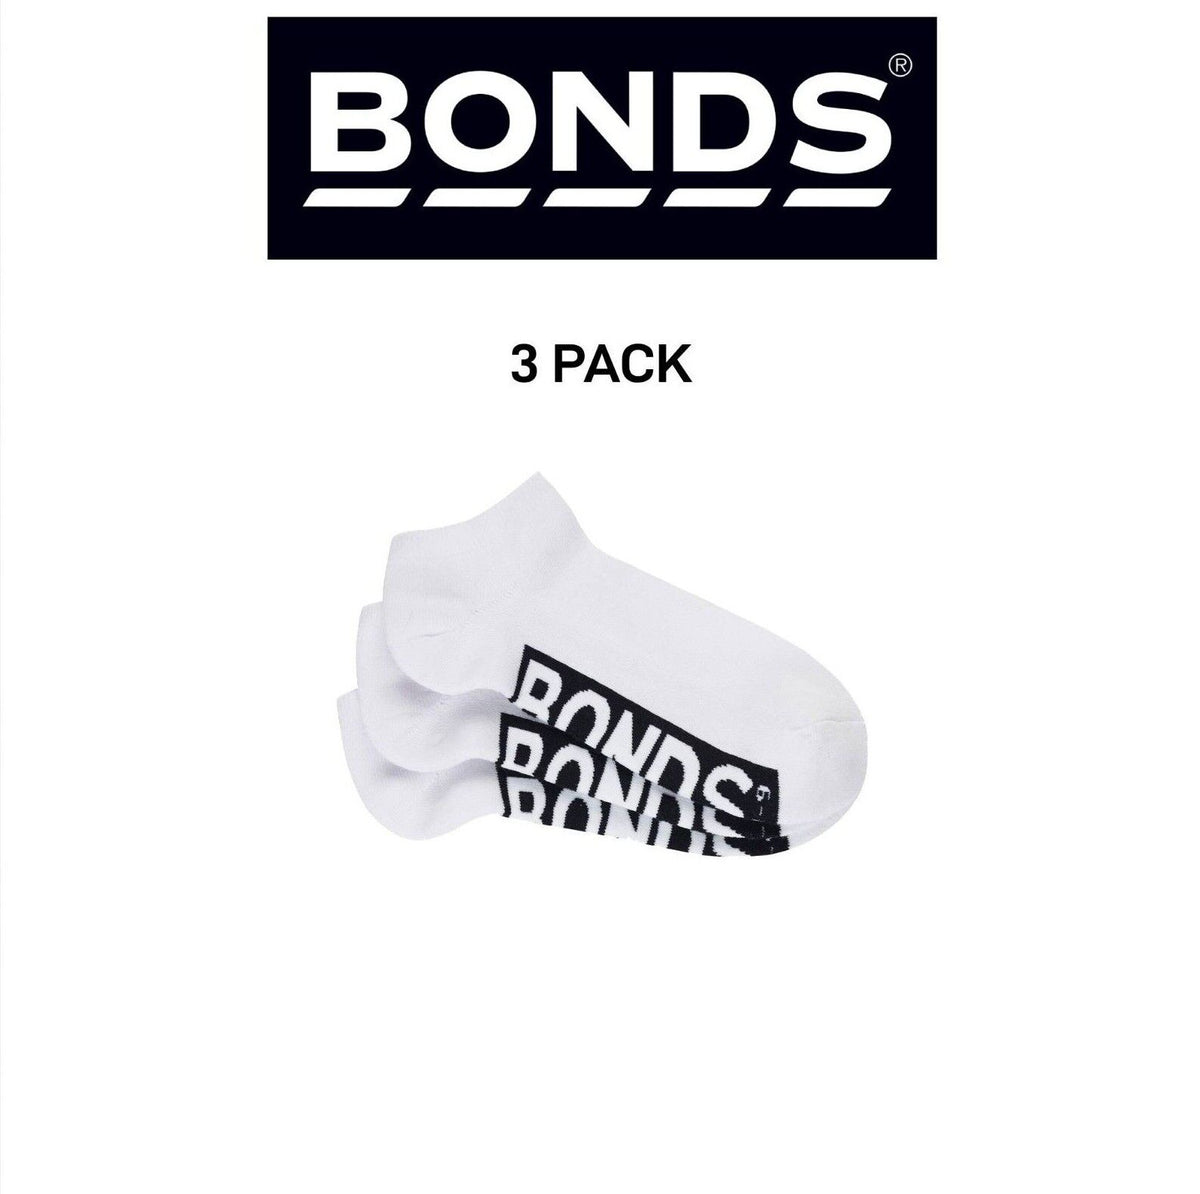 Bonds Mens Logo Cushioned Low Cut Smooth and Comfy Cotton Socks 3 Pack SXNA3N